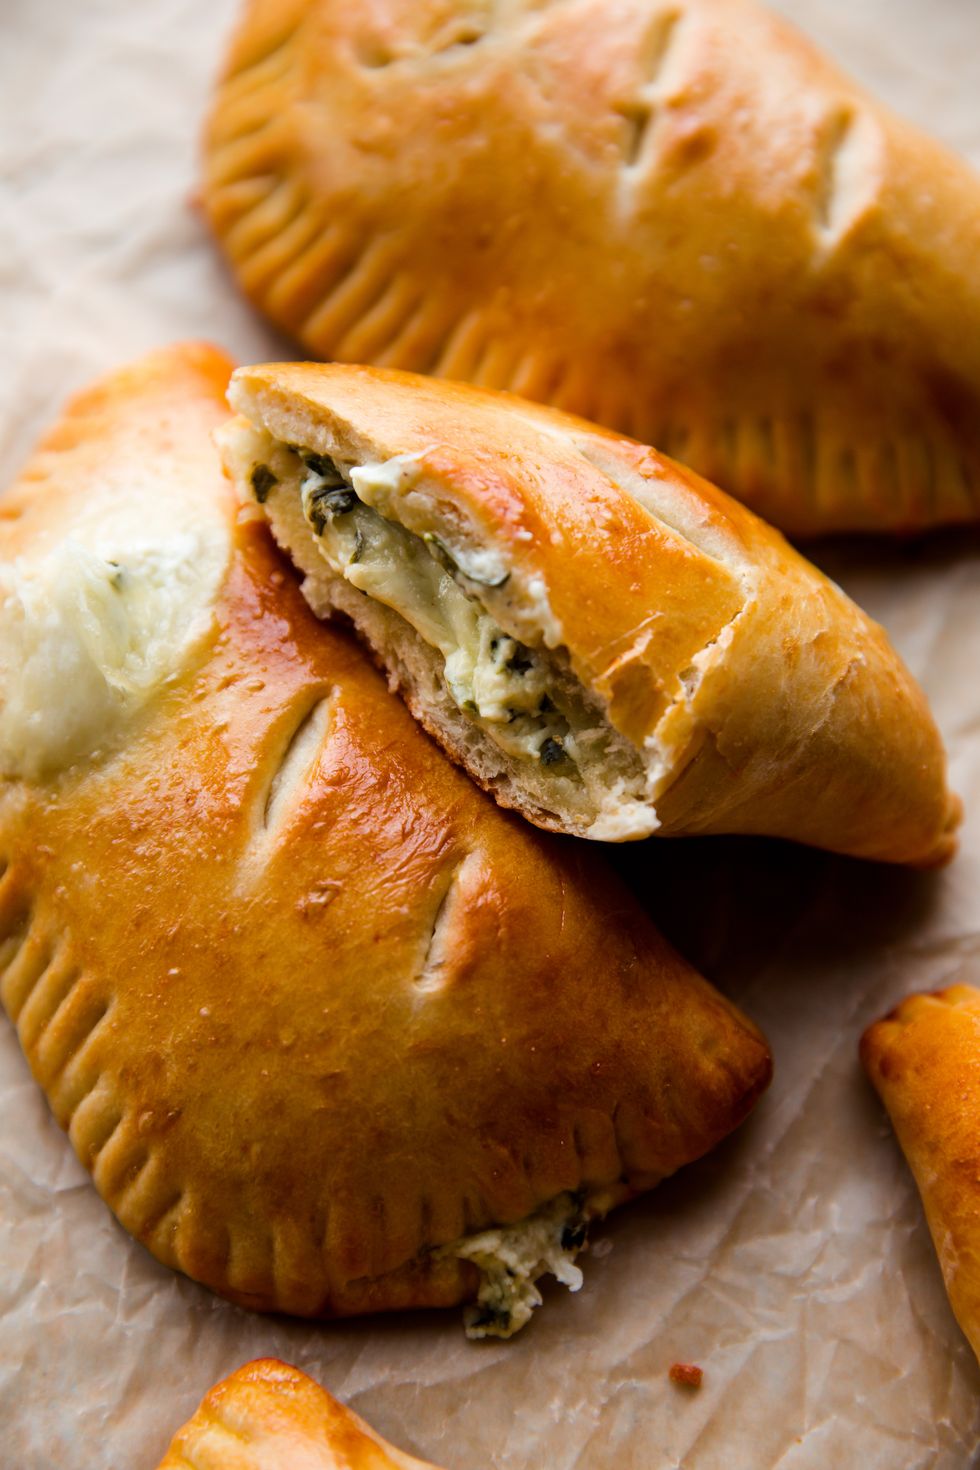 https://hips.hearstapps.com/del.h-cdn.co/assets/17/17/1493301535-hot-cheese-and-spinach-stuffed-pockets.jpg?resize=980:*